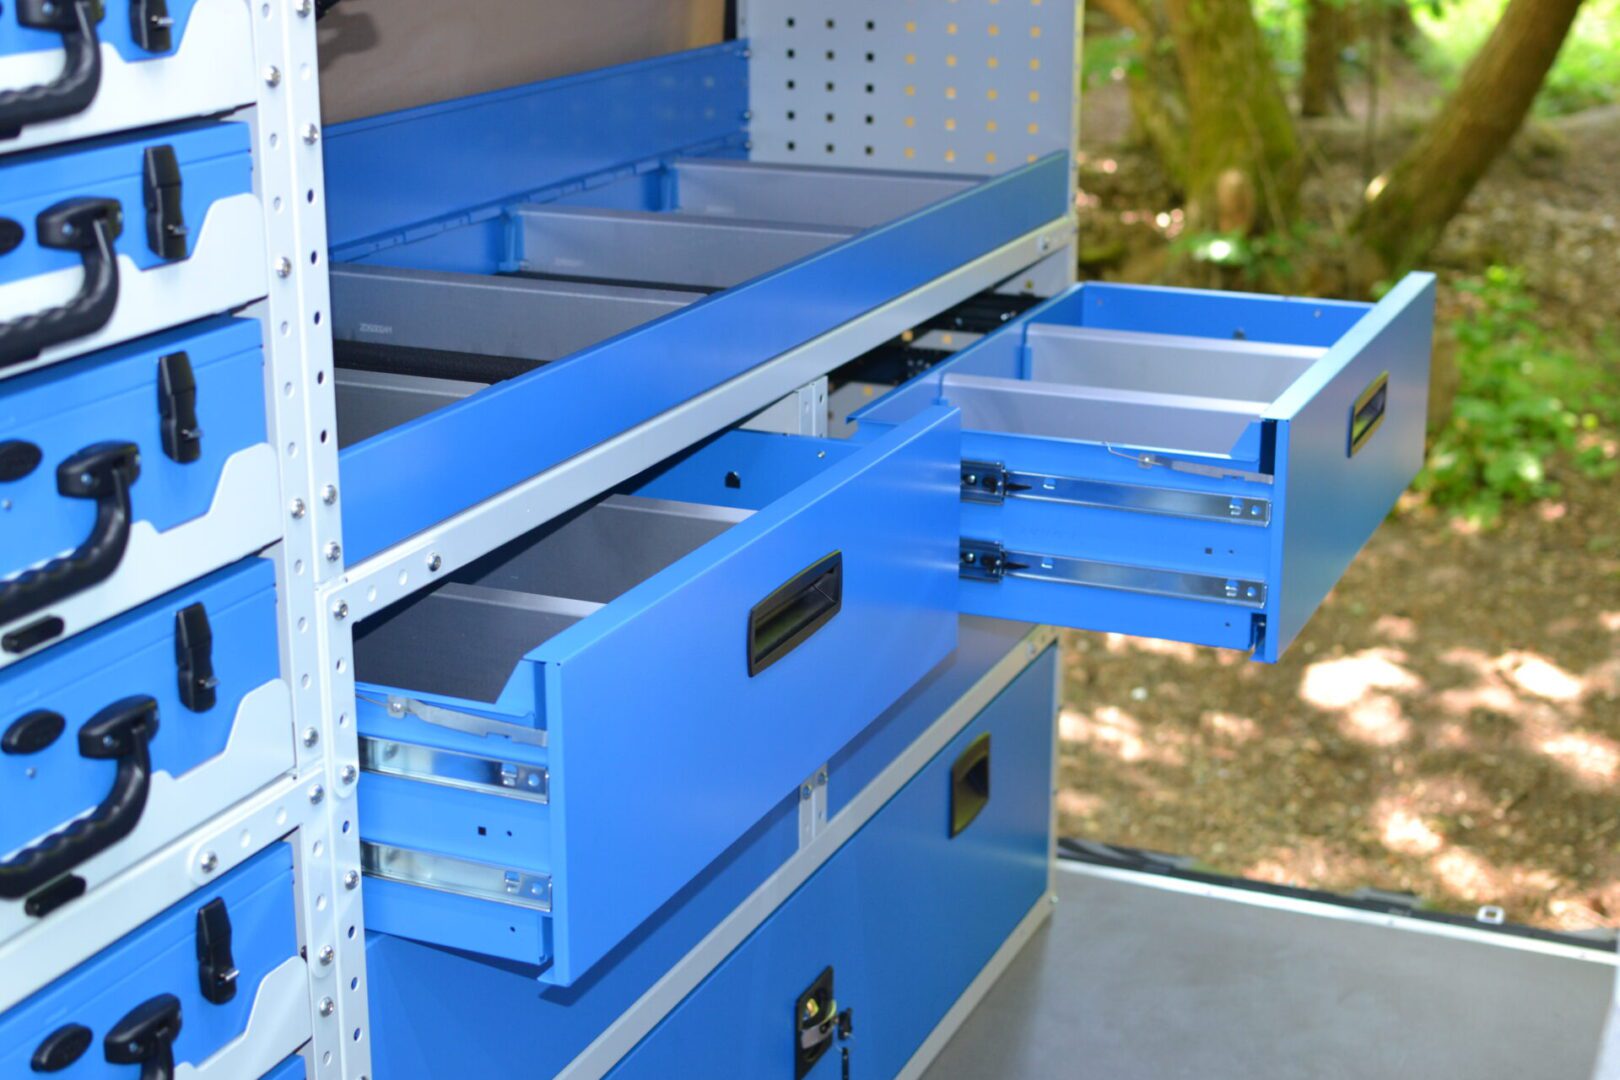 Van racking in a Sprinter drawers and open shelving units